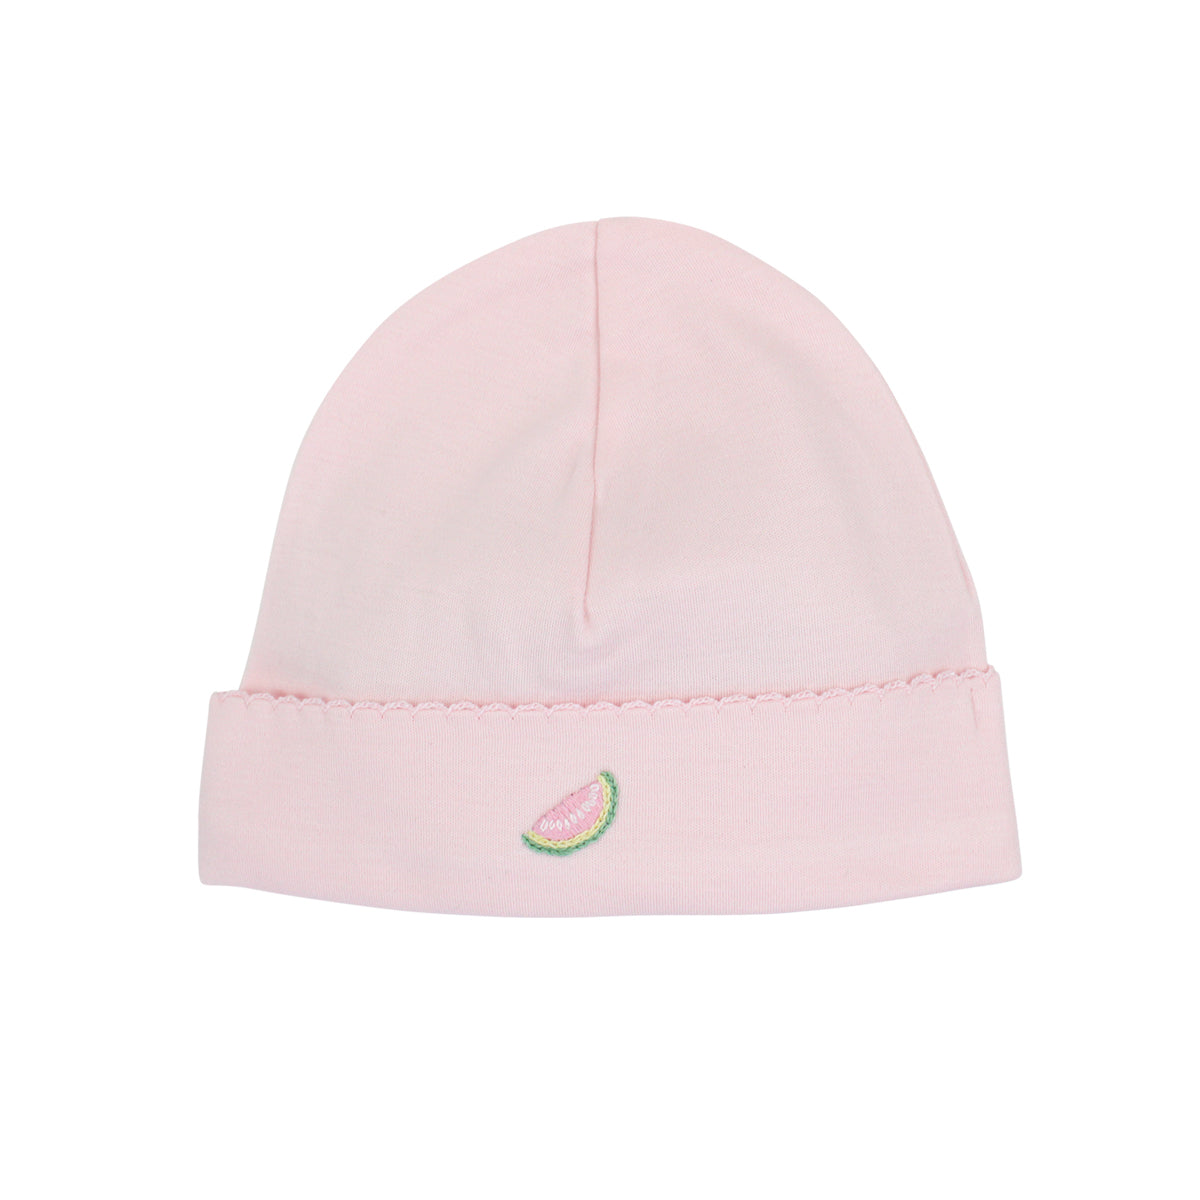 PIMA COTTON-SUMMER FRUITS EMBROIDERY HAT